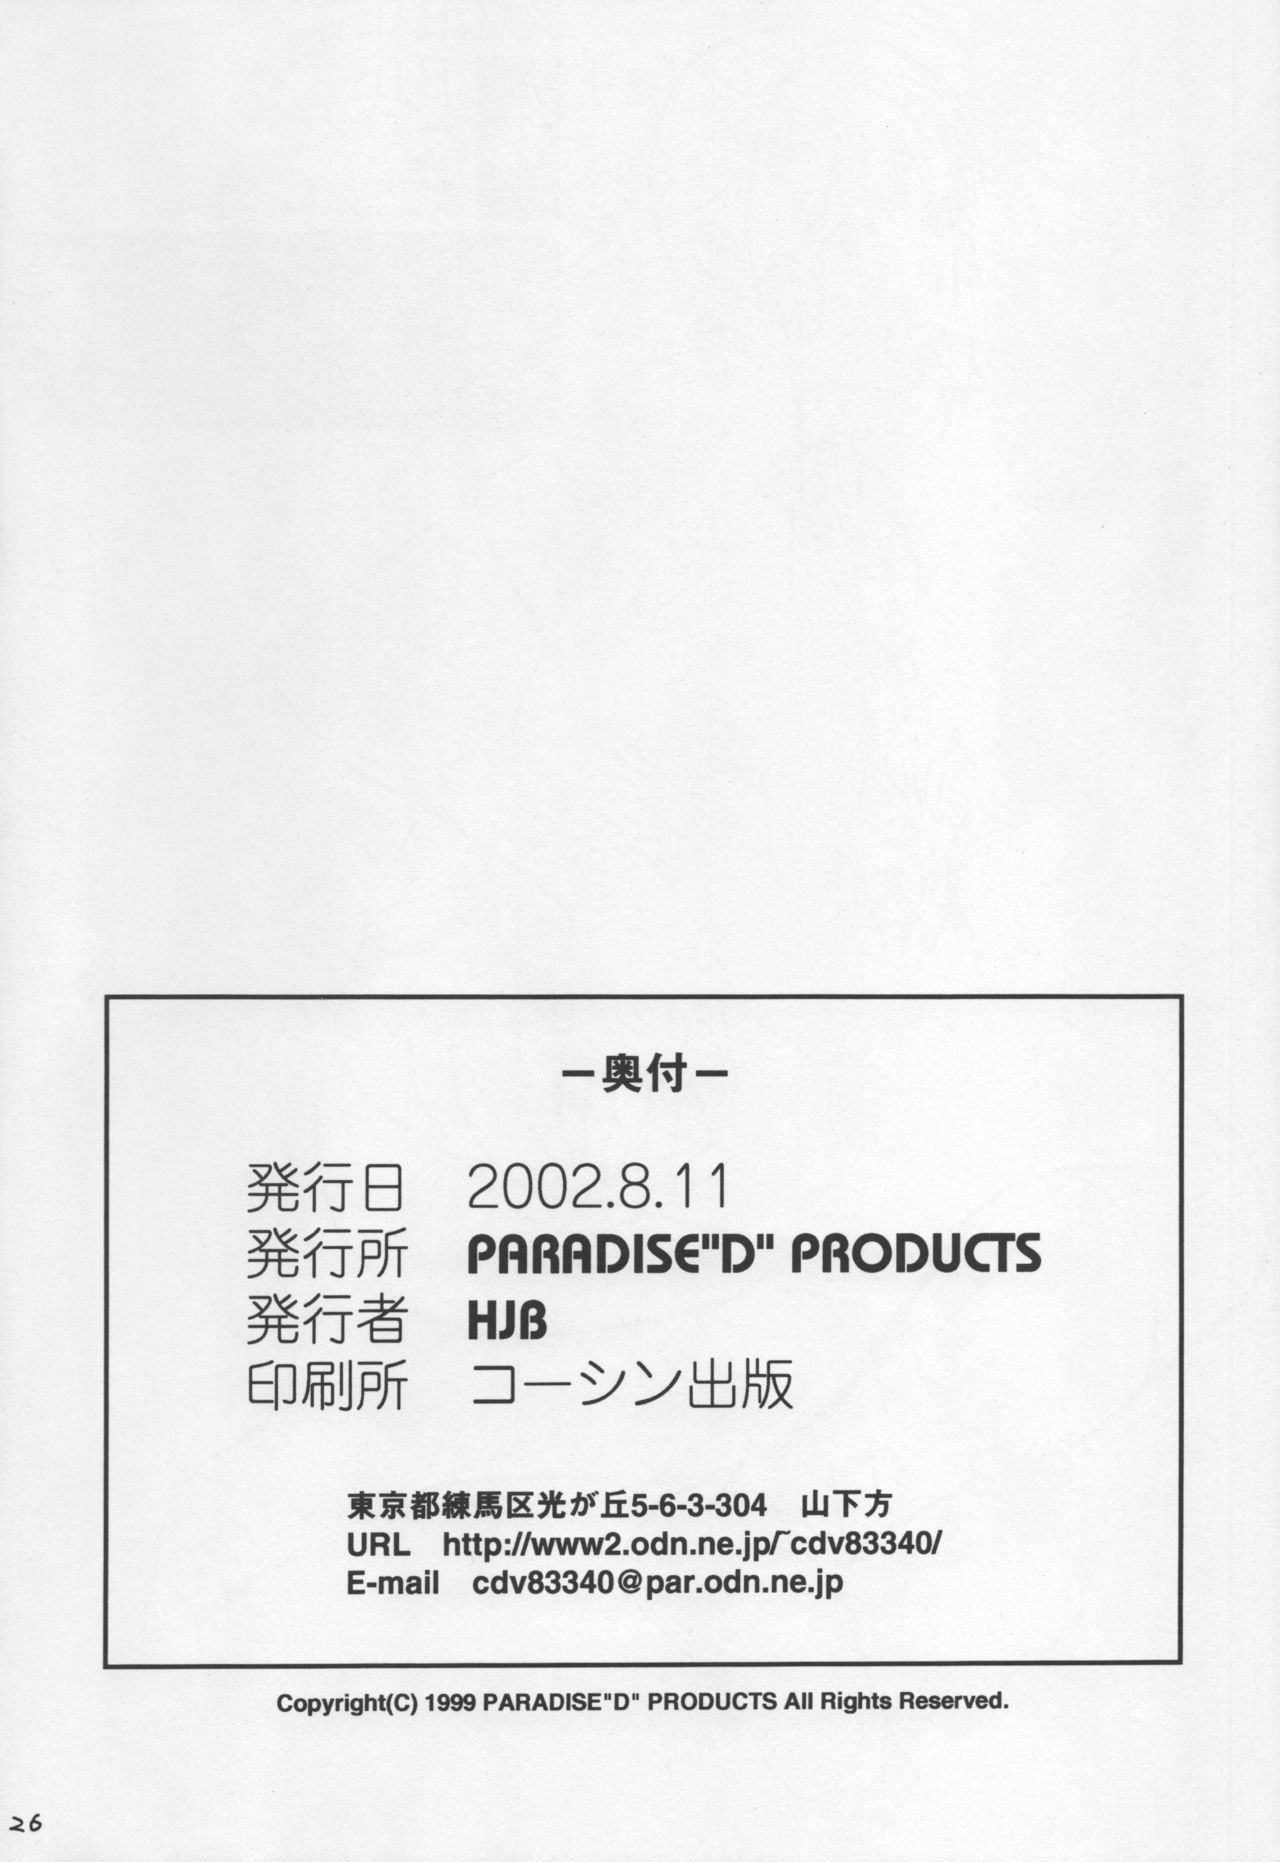 (C62) [PARADISED PRODUCTS (HJB)] PD Vol. 1 (Dead or Alive) page 26 full